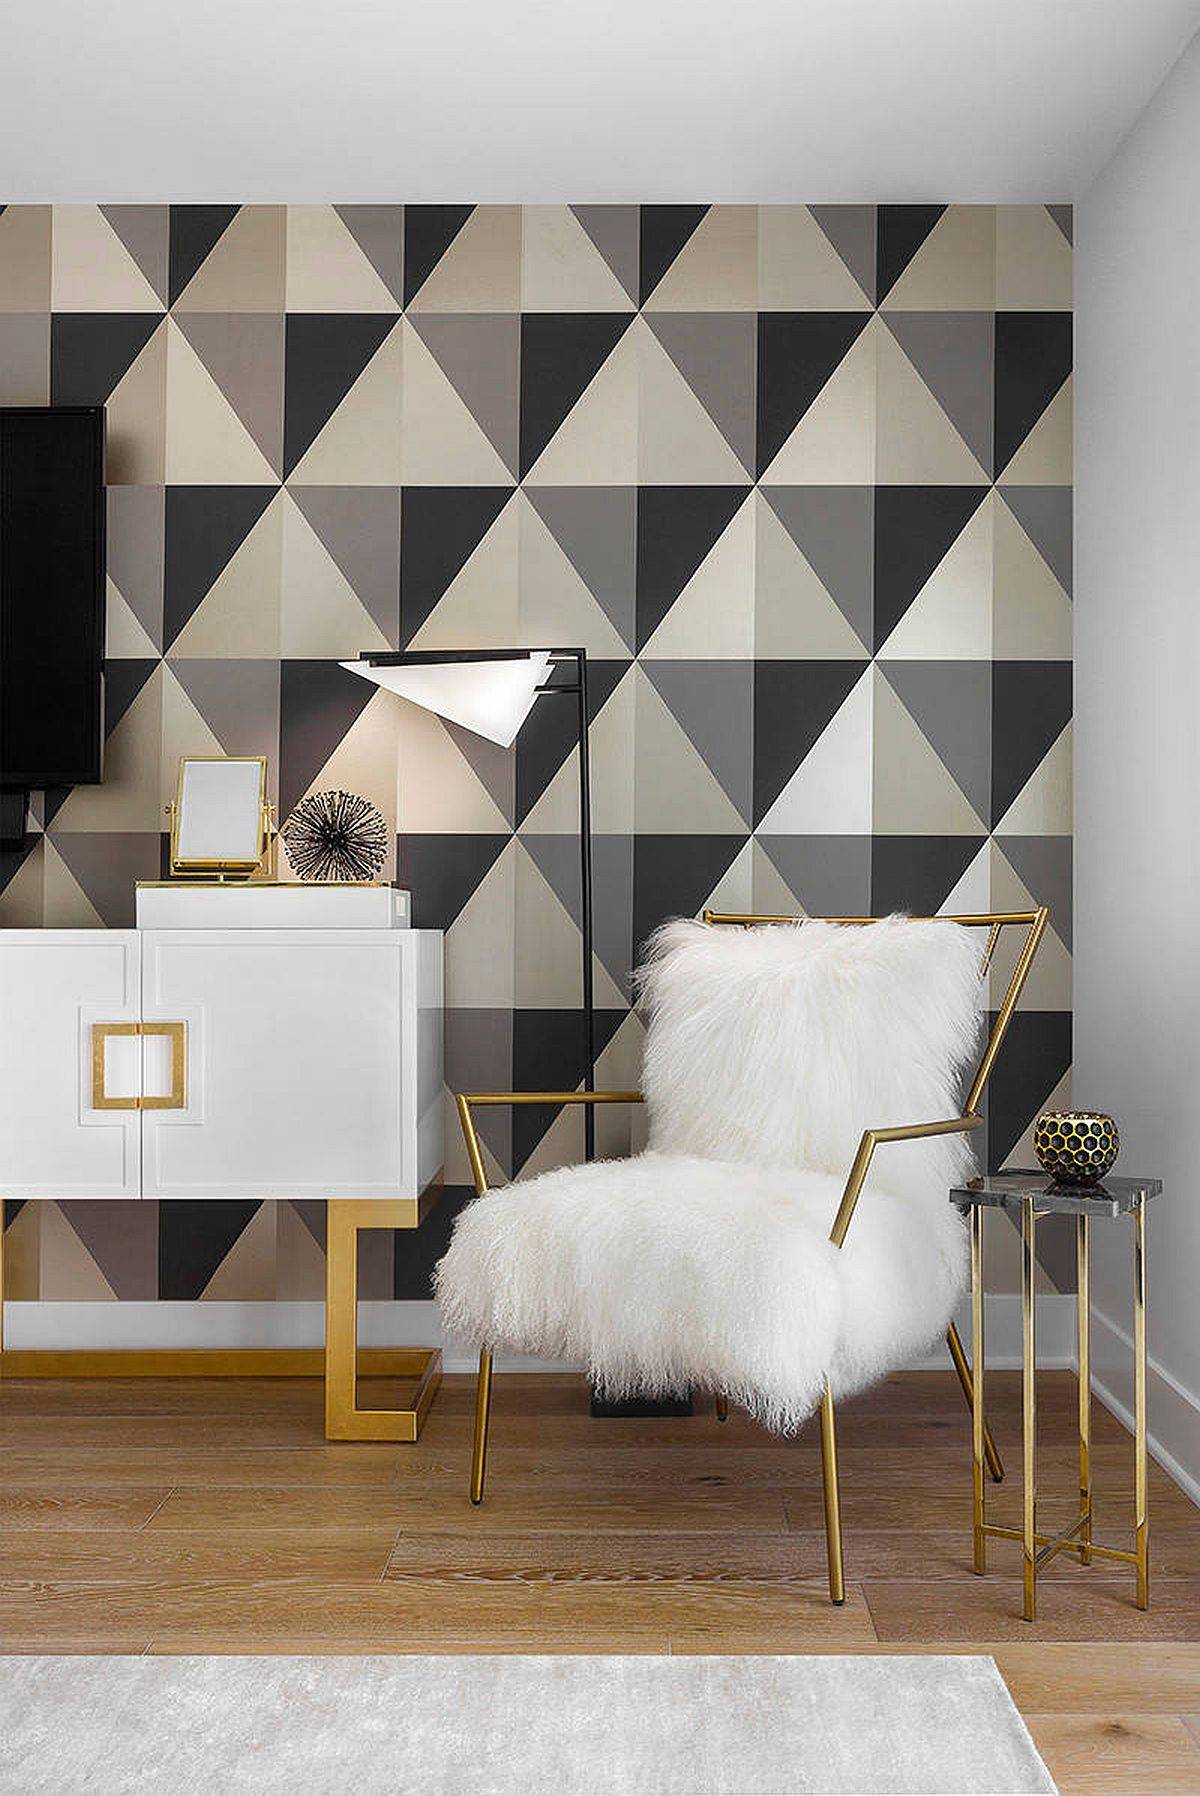 Traditional bedroom with white, black and gray geometric accent walls and a hint of Hollywood-glam-12227